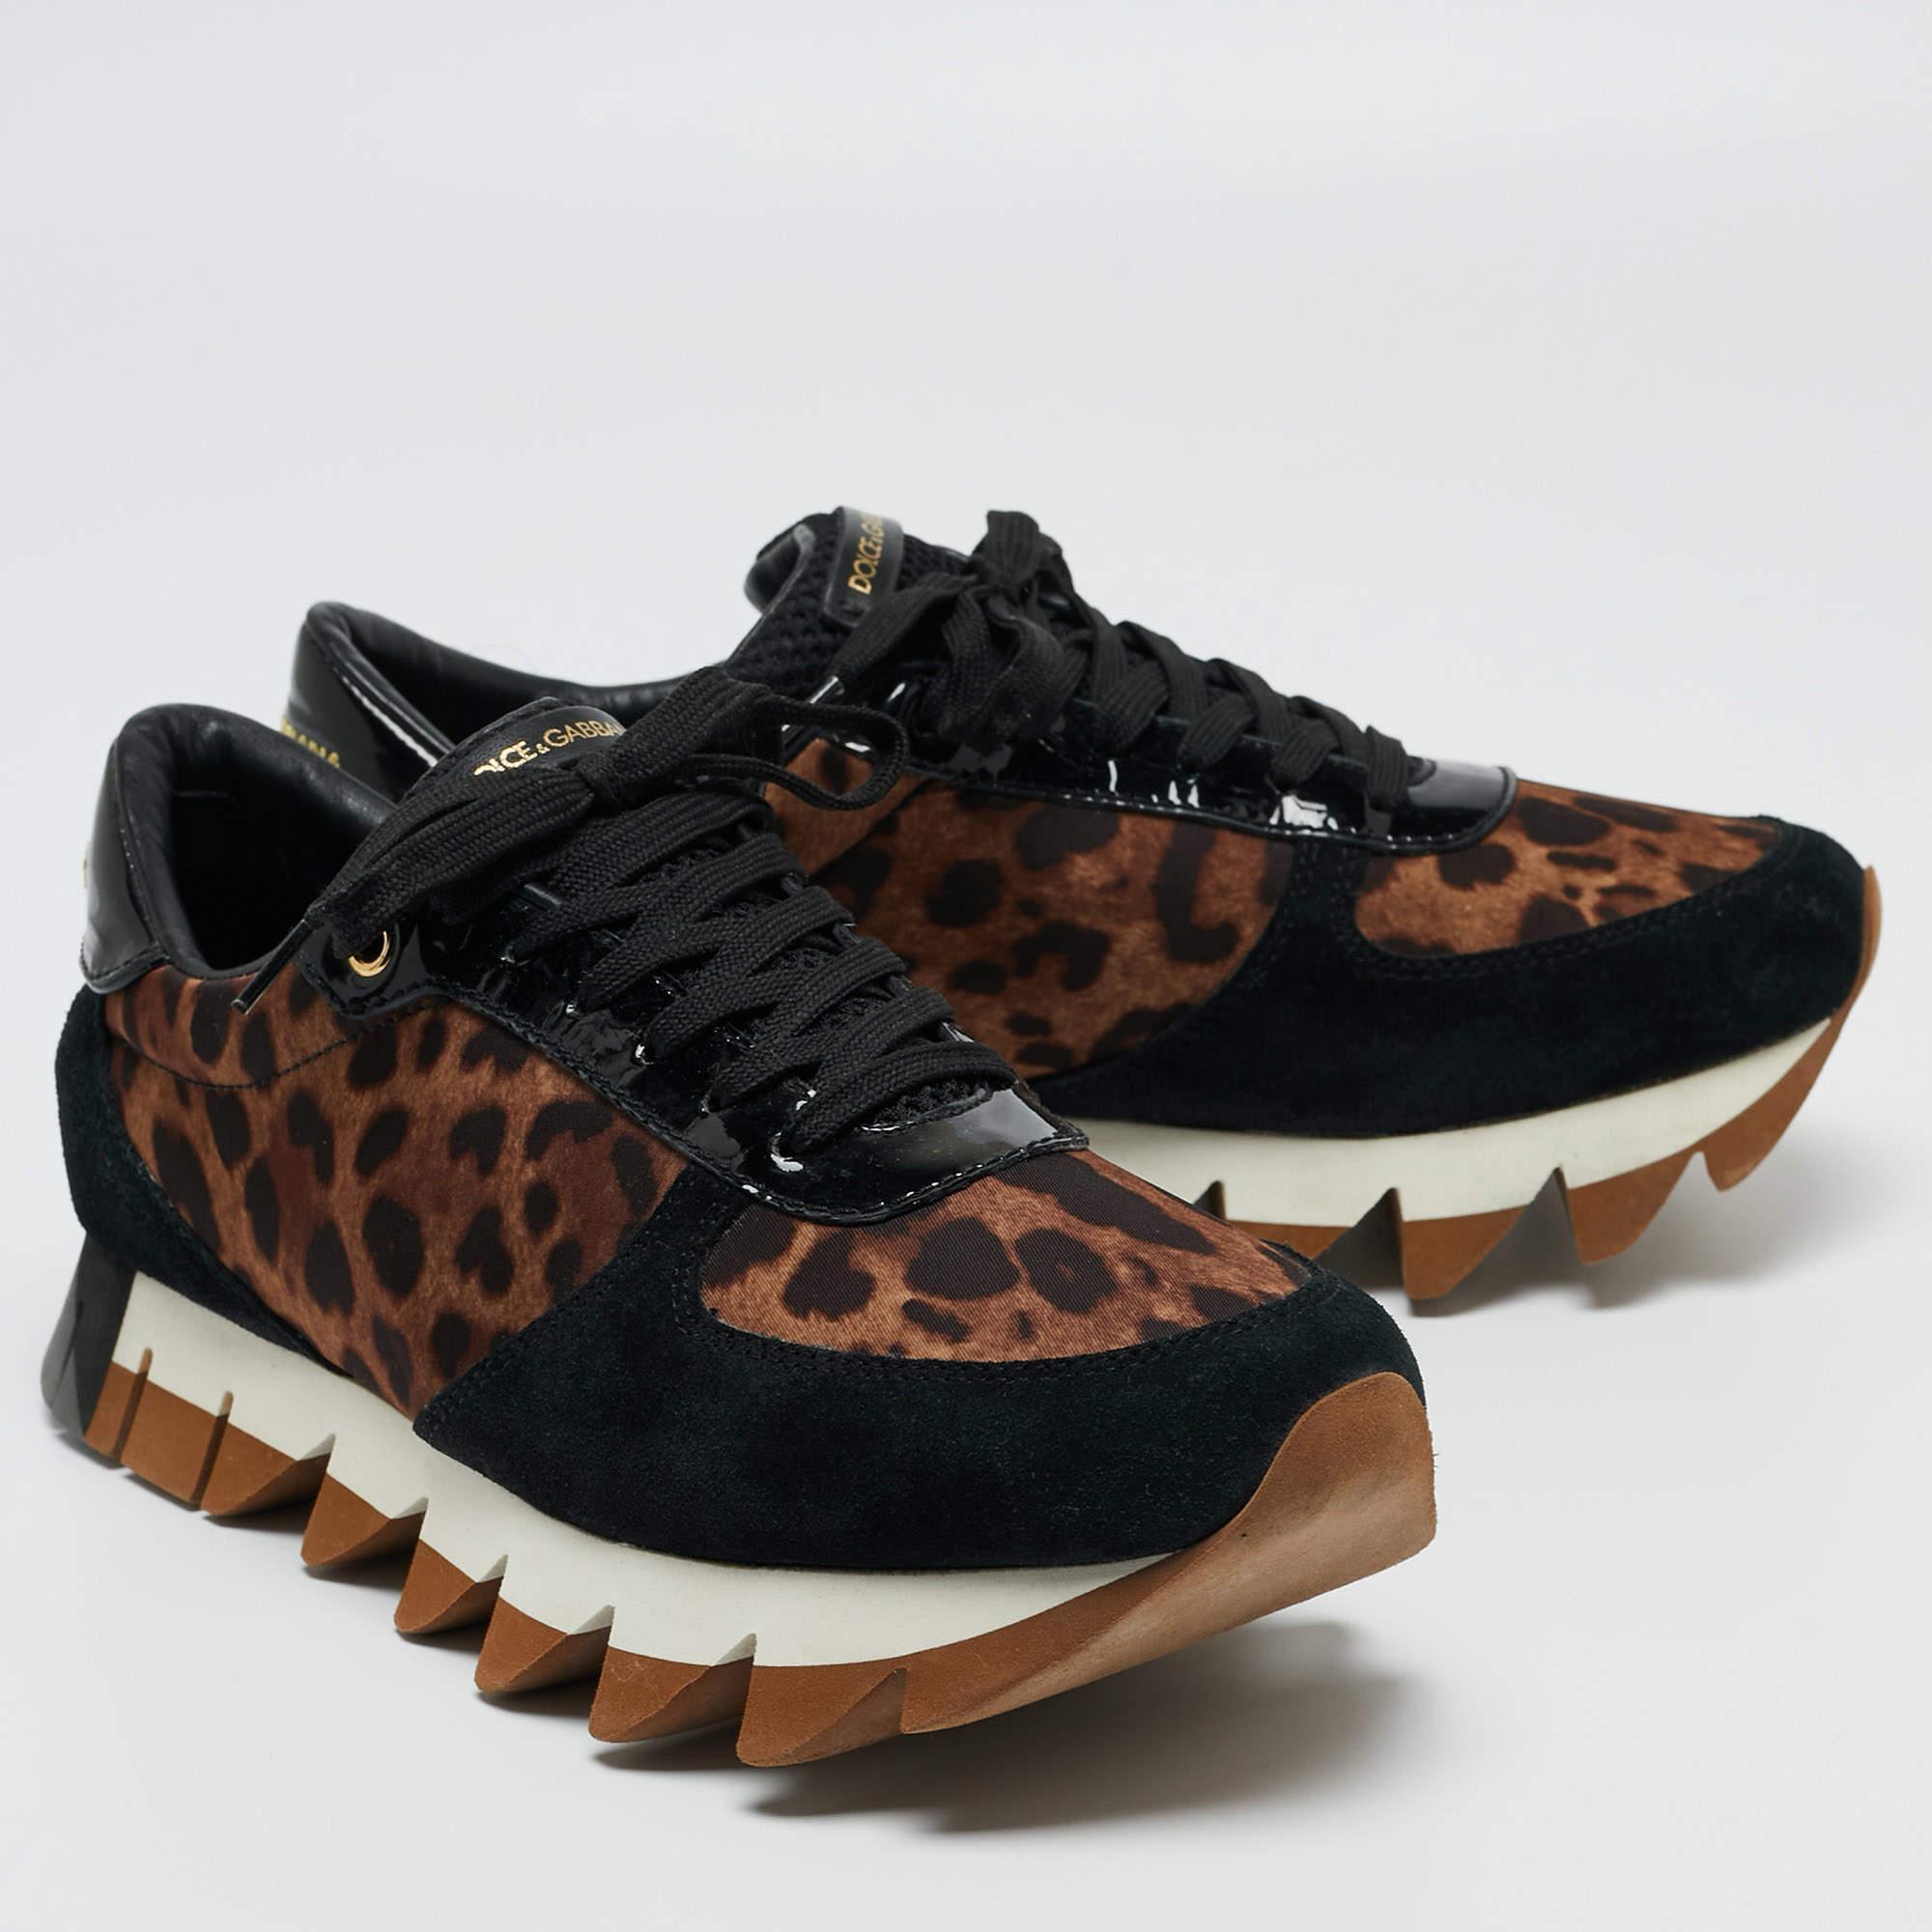 Dolce & Gabbana Suede and Leopard Print Fabric Low Top Sneakers Size 40 For Sale 3